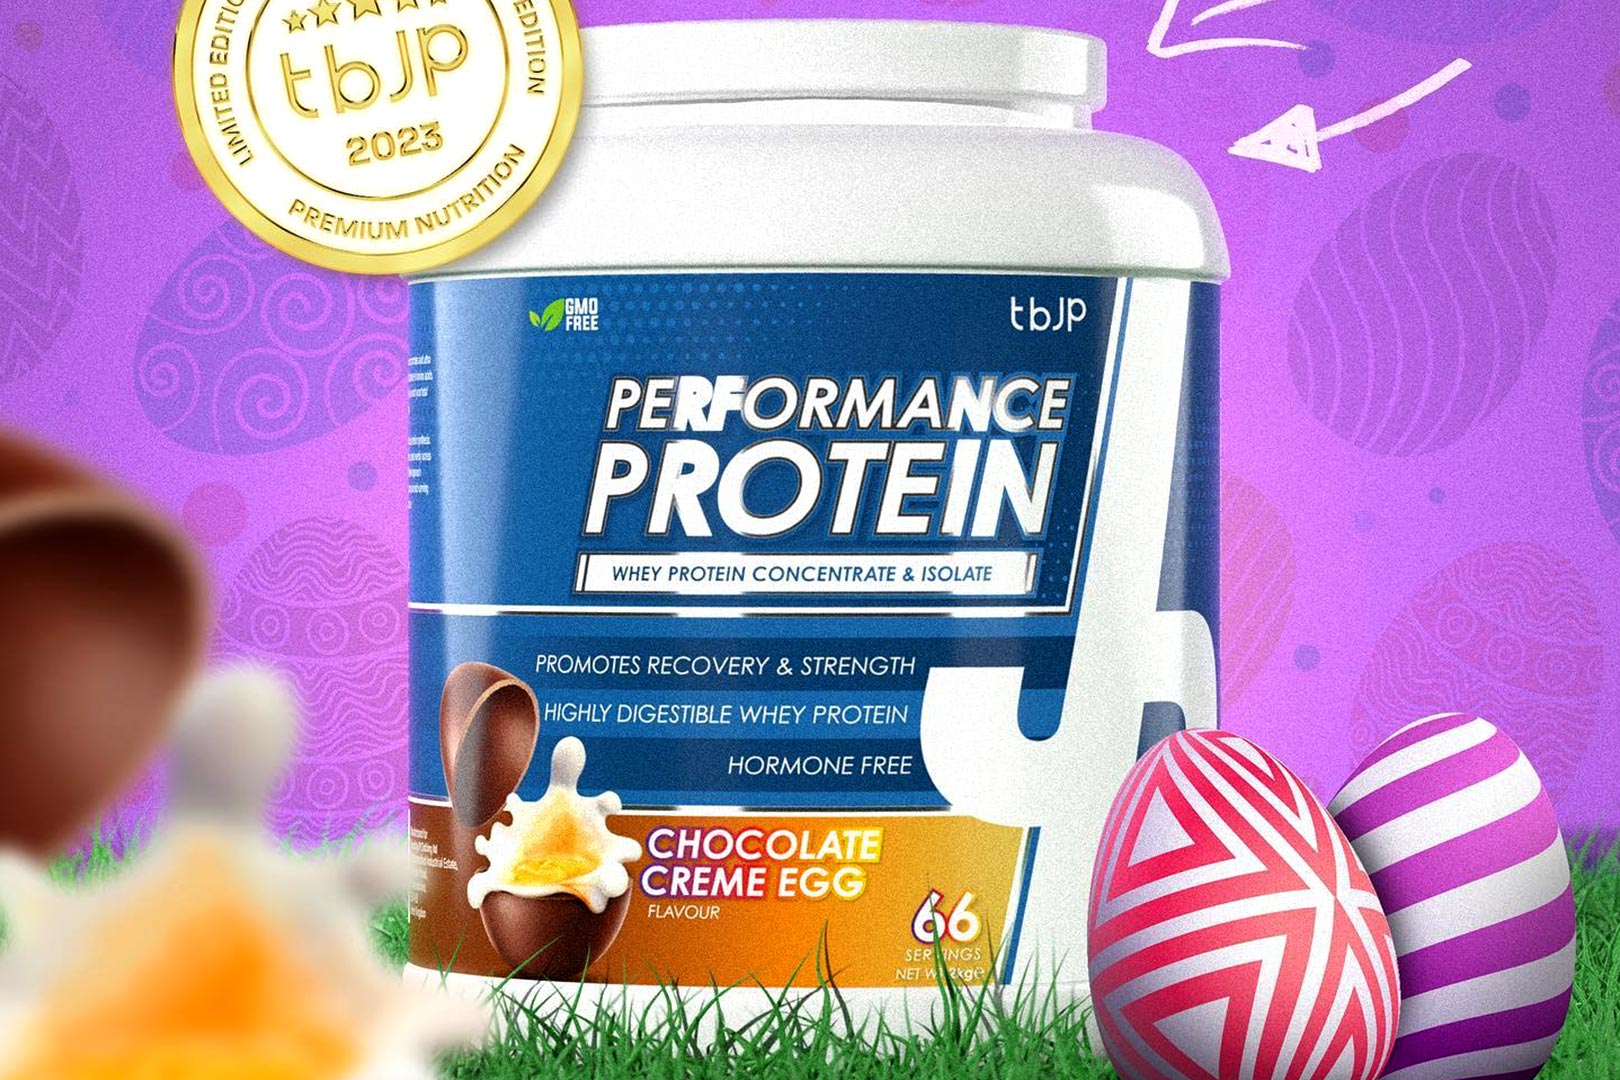 Trained By Jp Nutrition Chocolate Creme Egg Performance Protein